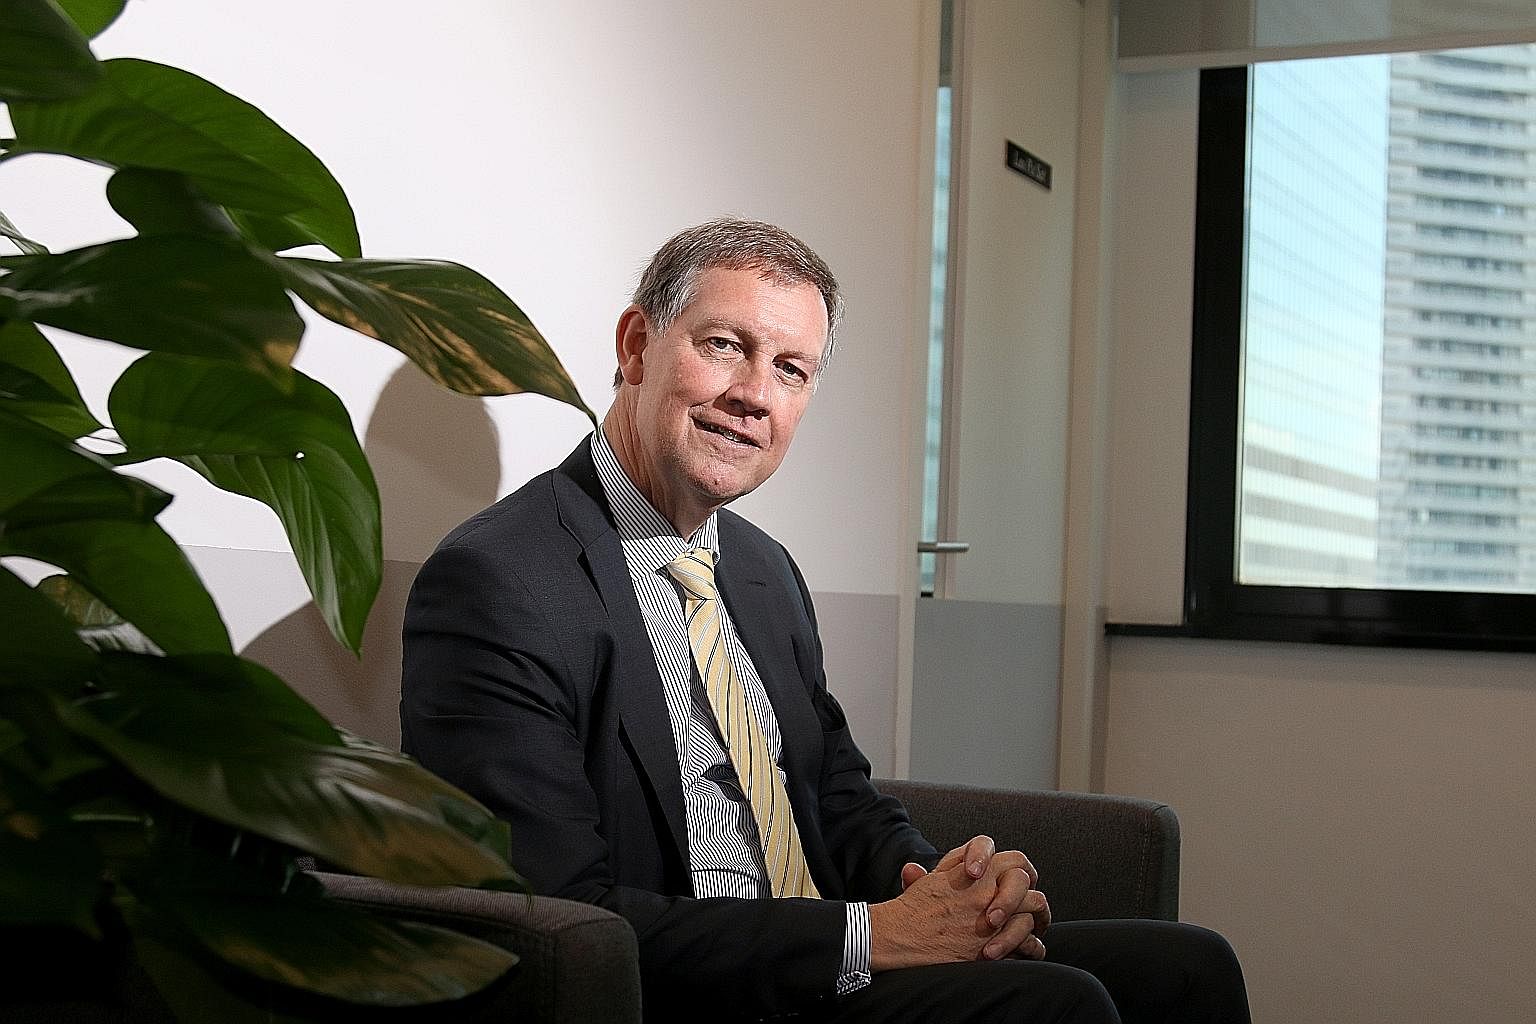 Mr Tommy Helsby joined Kroll in 1981 when it was a single-office company in New York and is now its longest-serving employee. The chairman of investigations and disputes at Kroll says Singapore has become a very active hub for the firm, as emerging m